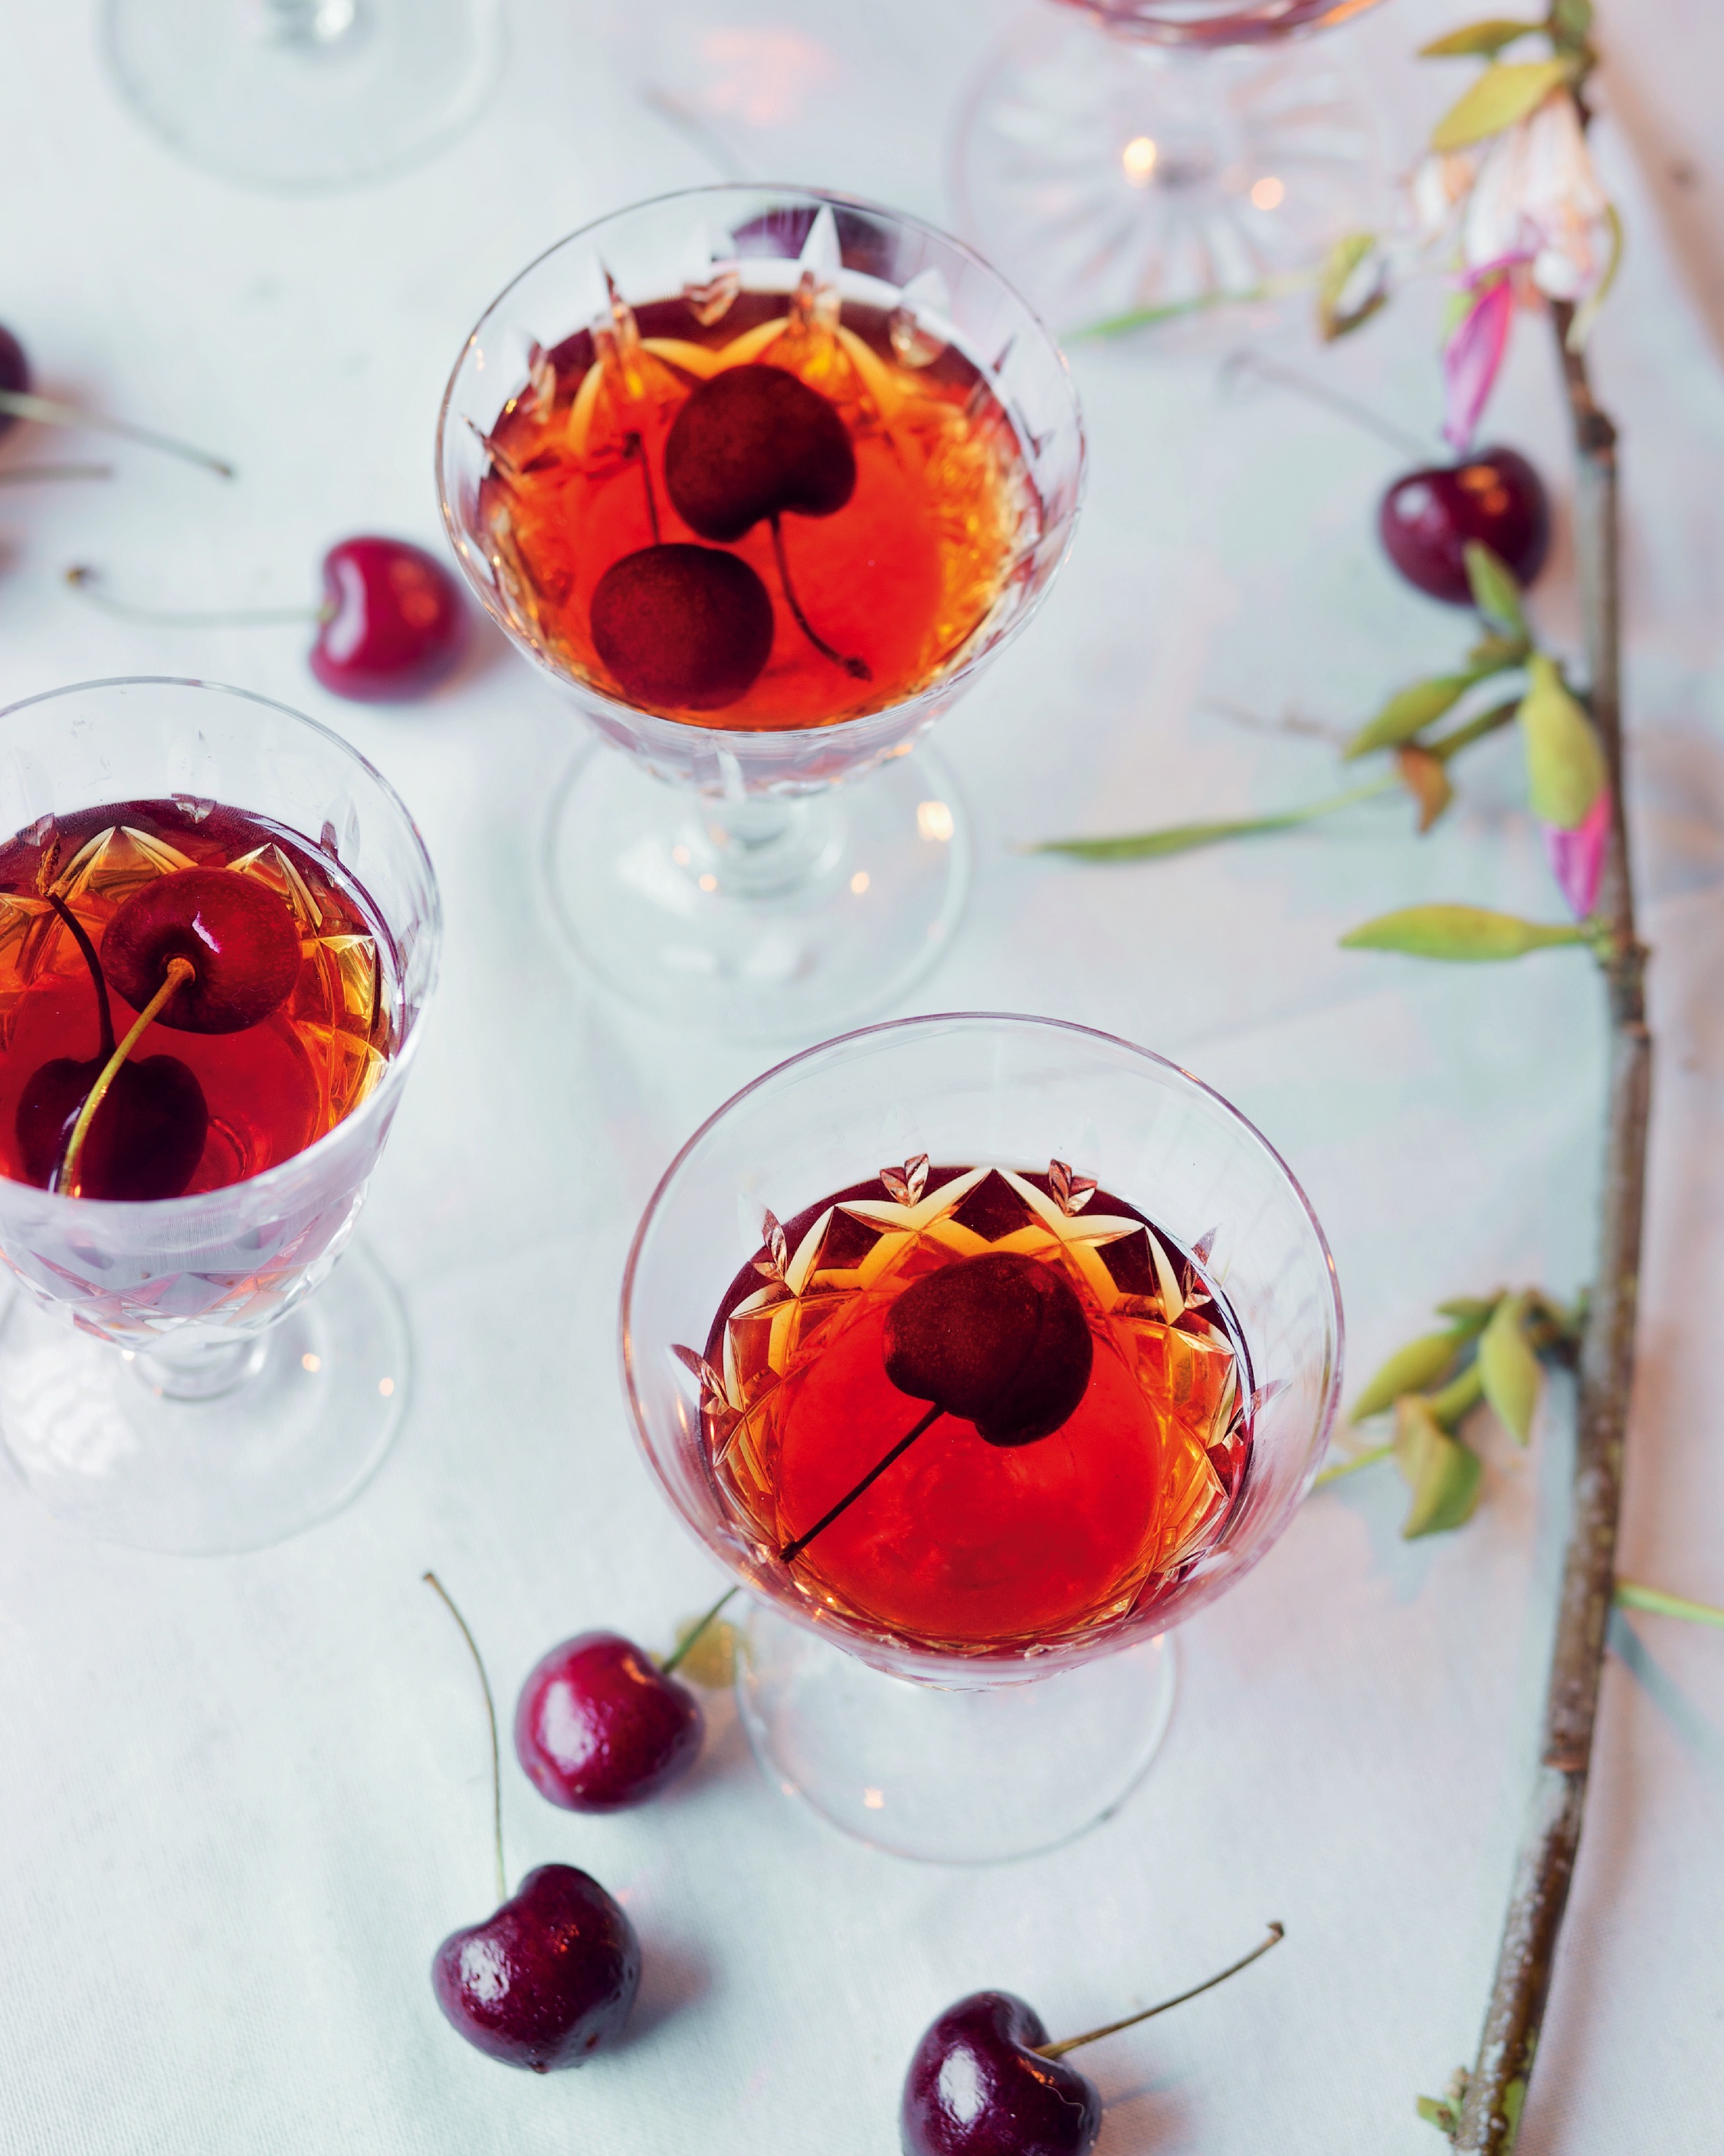 You are currently viewing Celebrate in style with these Christmas cherry martinis